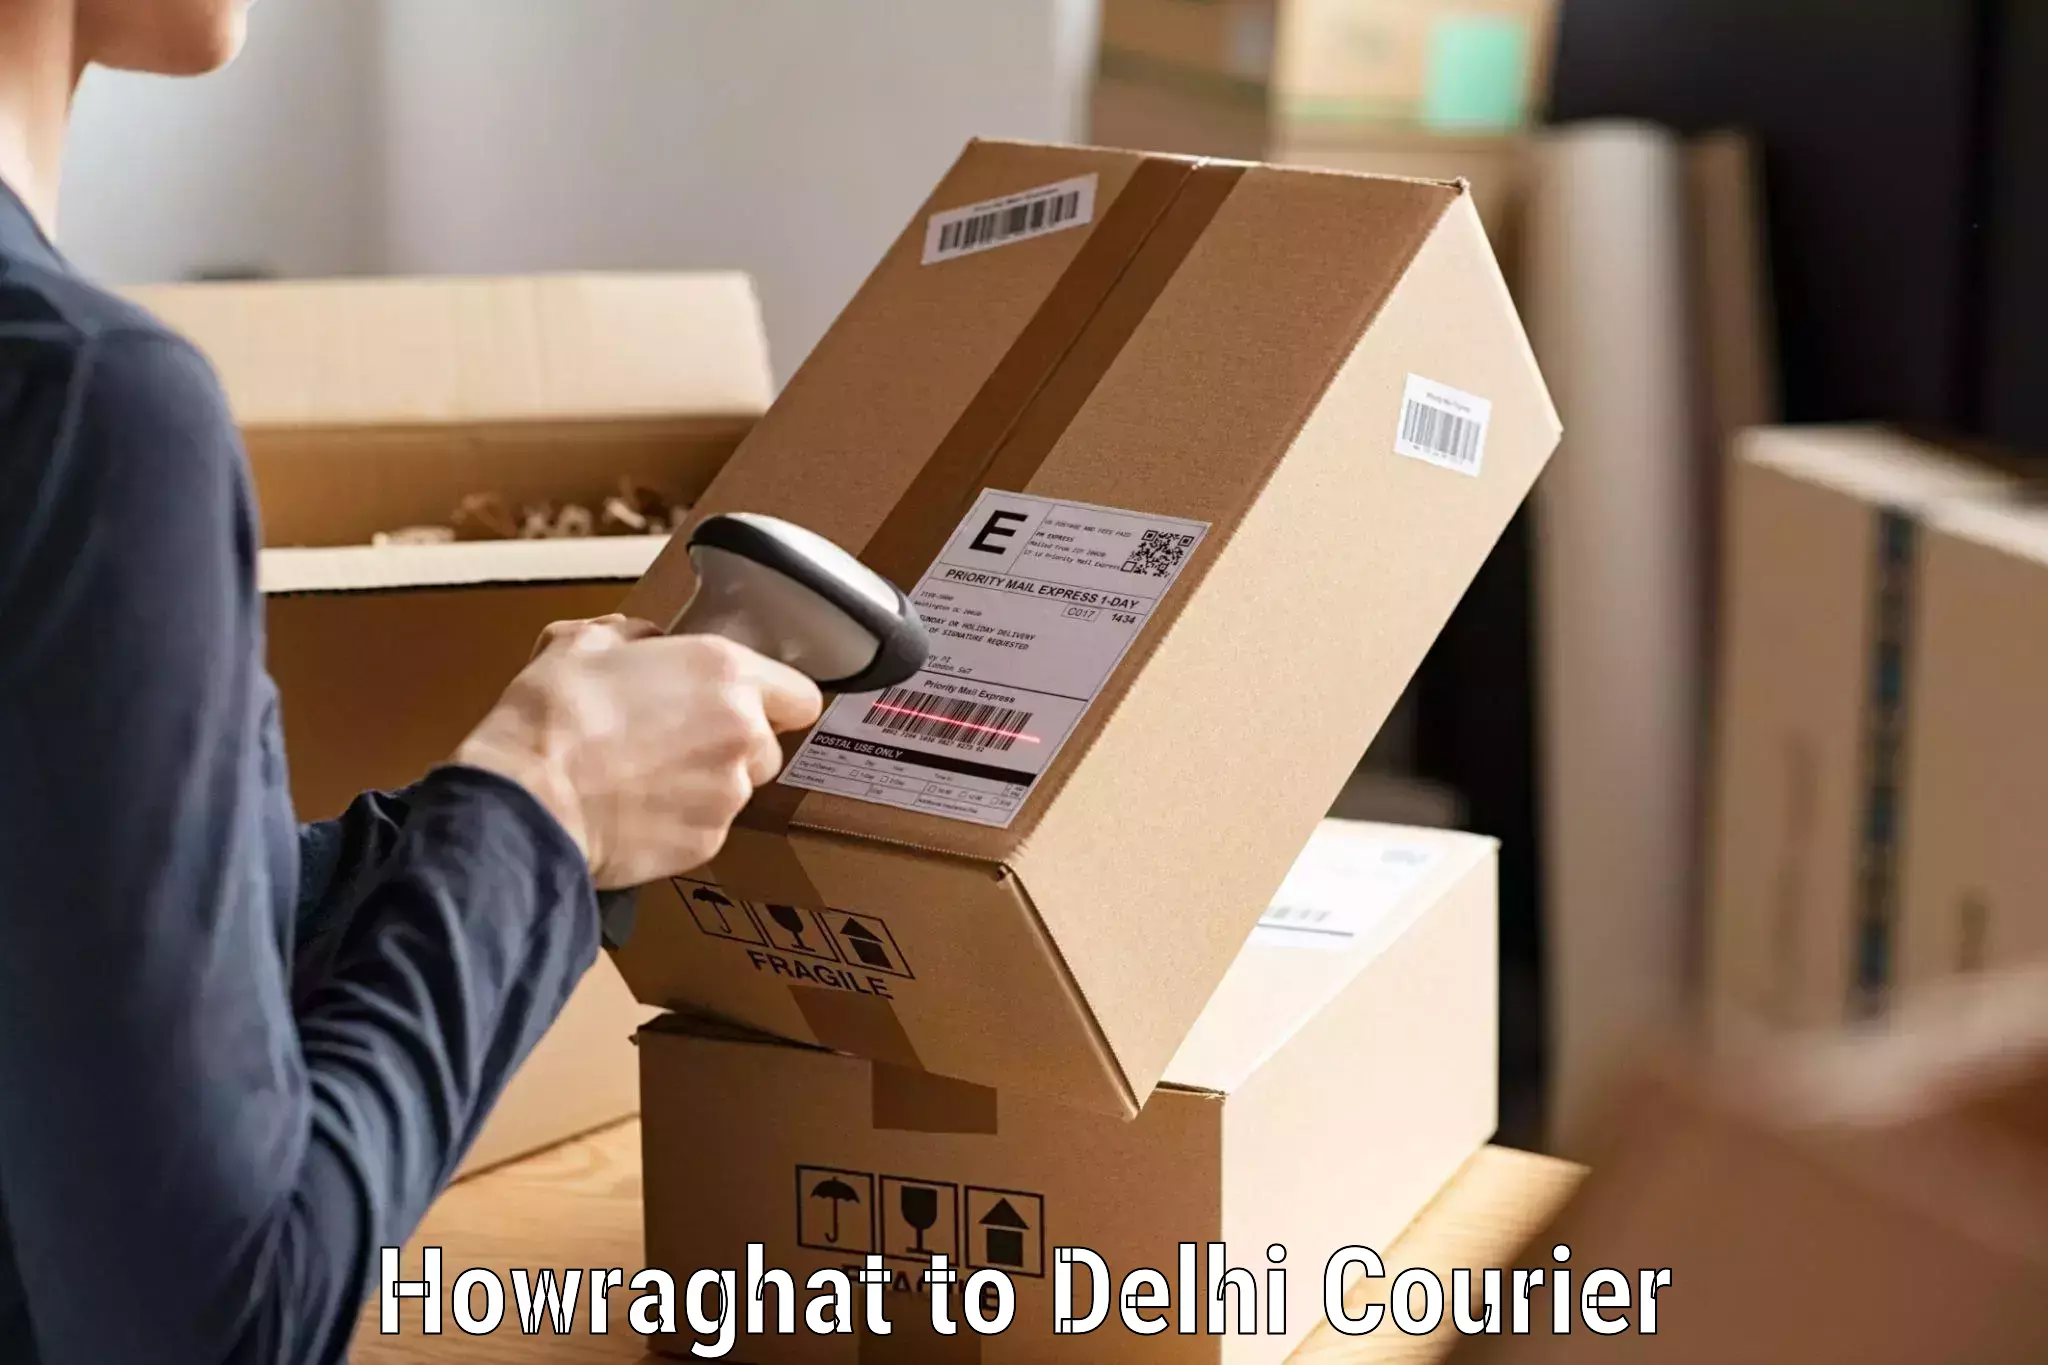 On-call courier service Howraghat to NCR